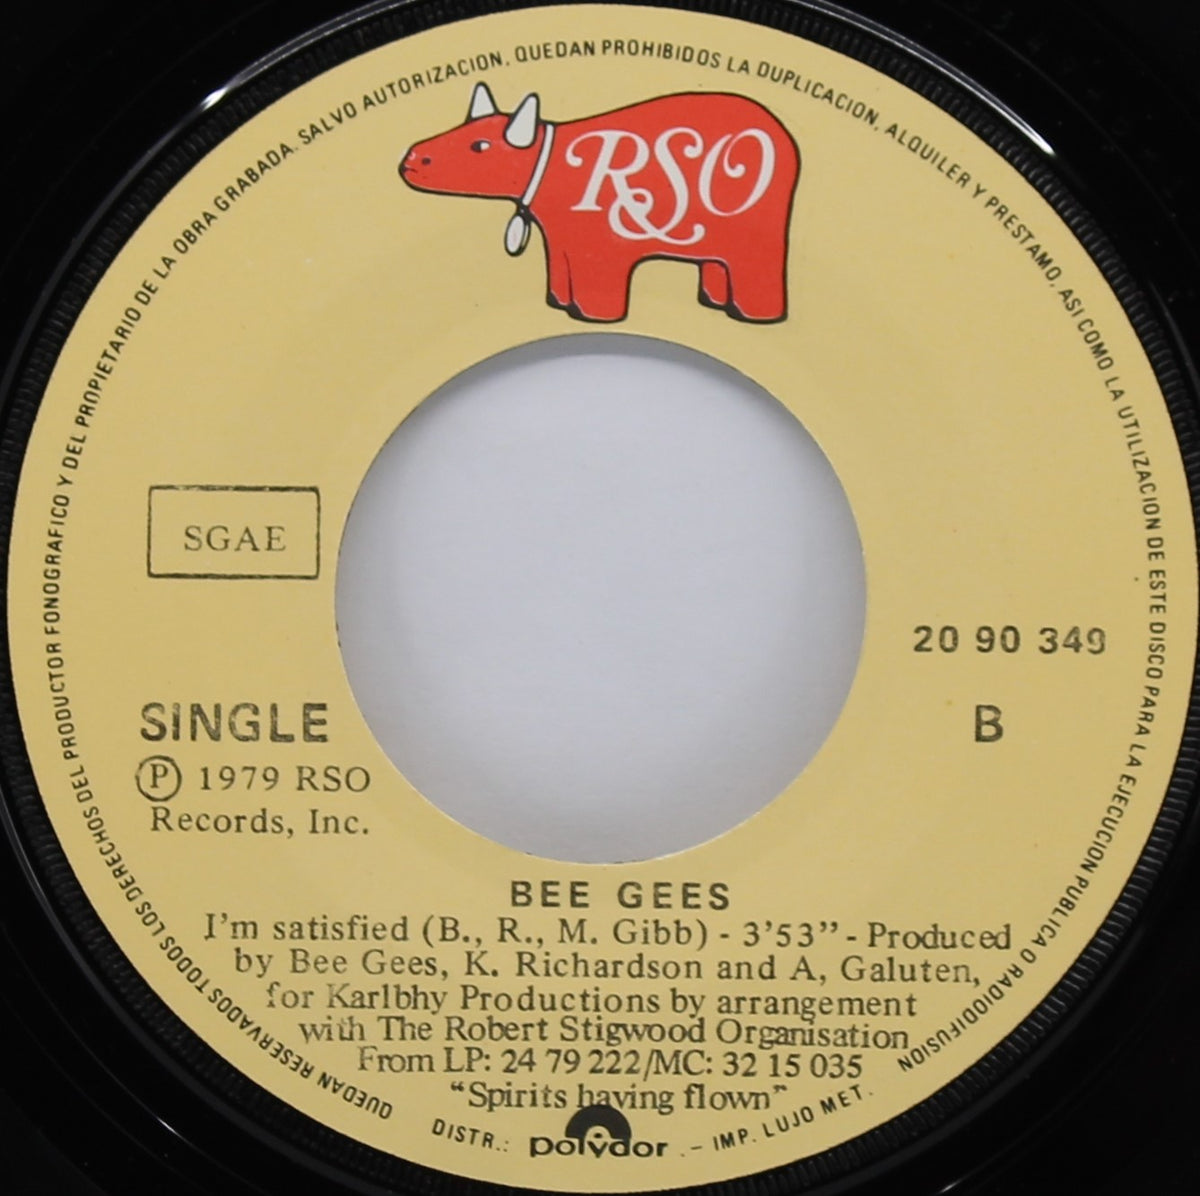 Bee Gees - Love You Inside Out, Vinyl, 7&quot;, 45 RPM, Single, Spain 1979